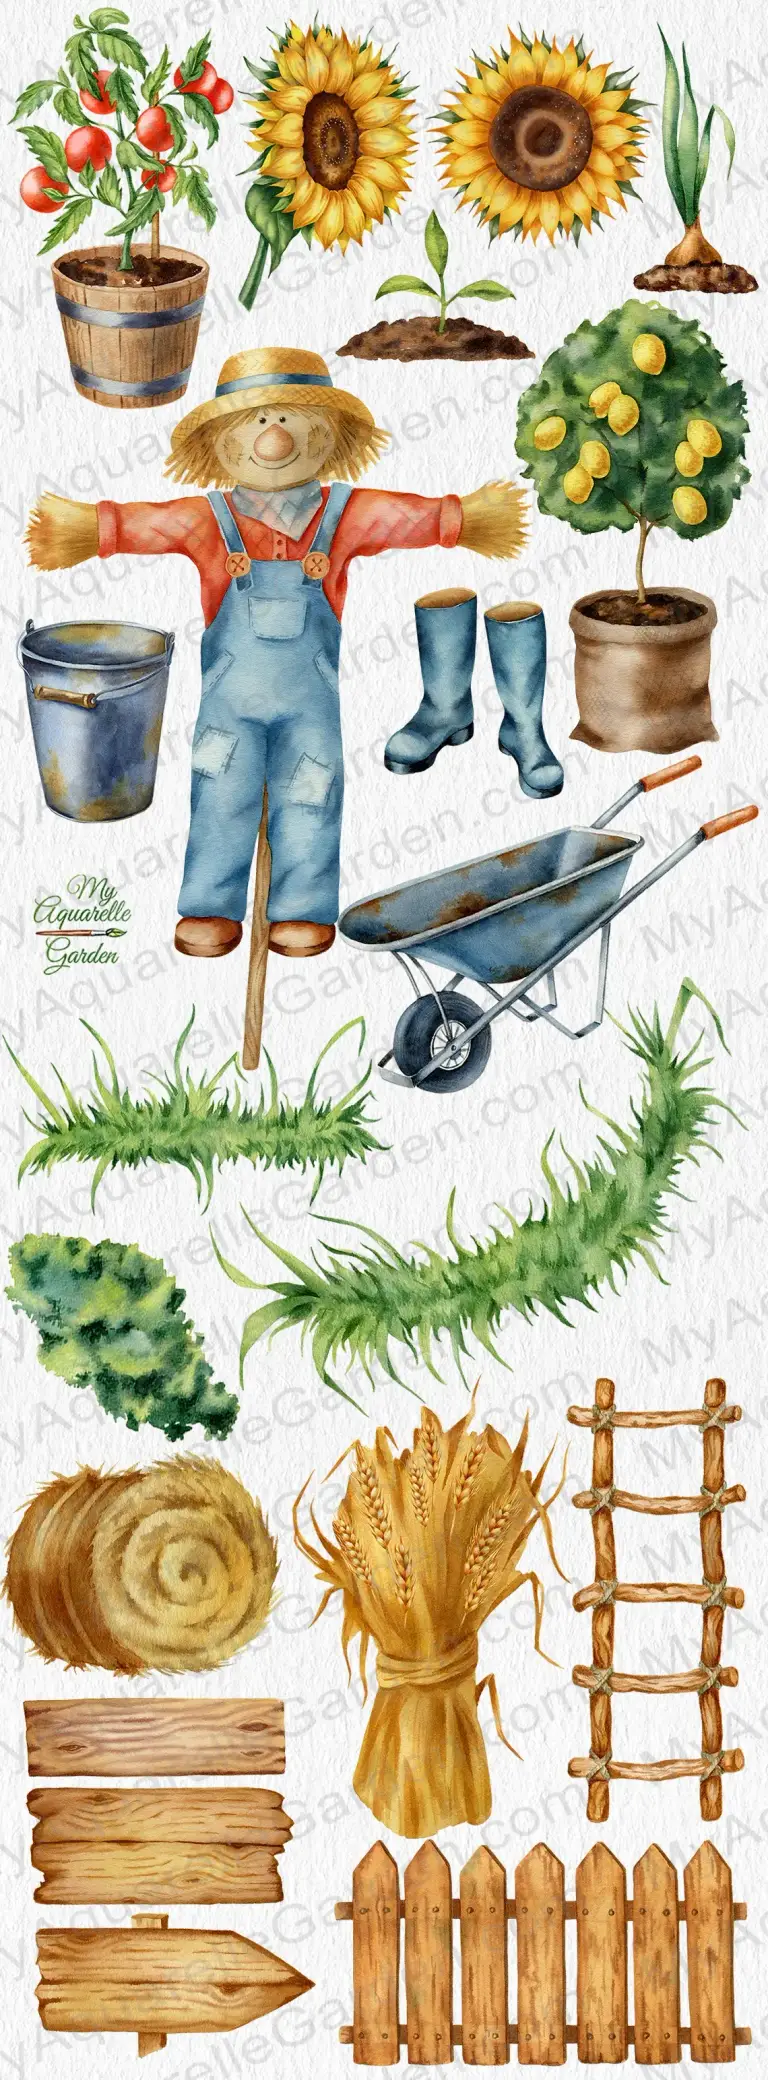 Watercolor clip art from the Farm collection: Scarecrow, bucket, rubber boots, watering can, wheelbarrow, bird robin, wooden fence, wooden road sign, grass, flowers, lemon tree, onion, sunflower, strawberries, and other items from the collection.  Digital watercolor clip art for personal or small commercial use.